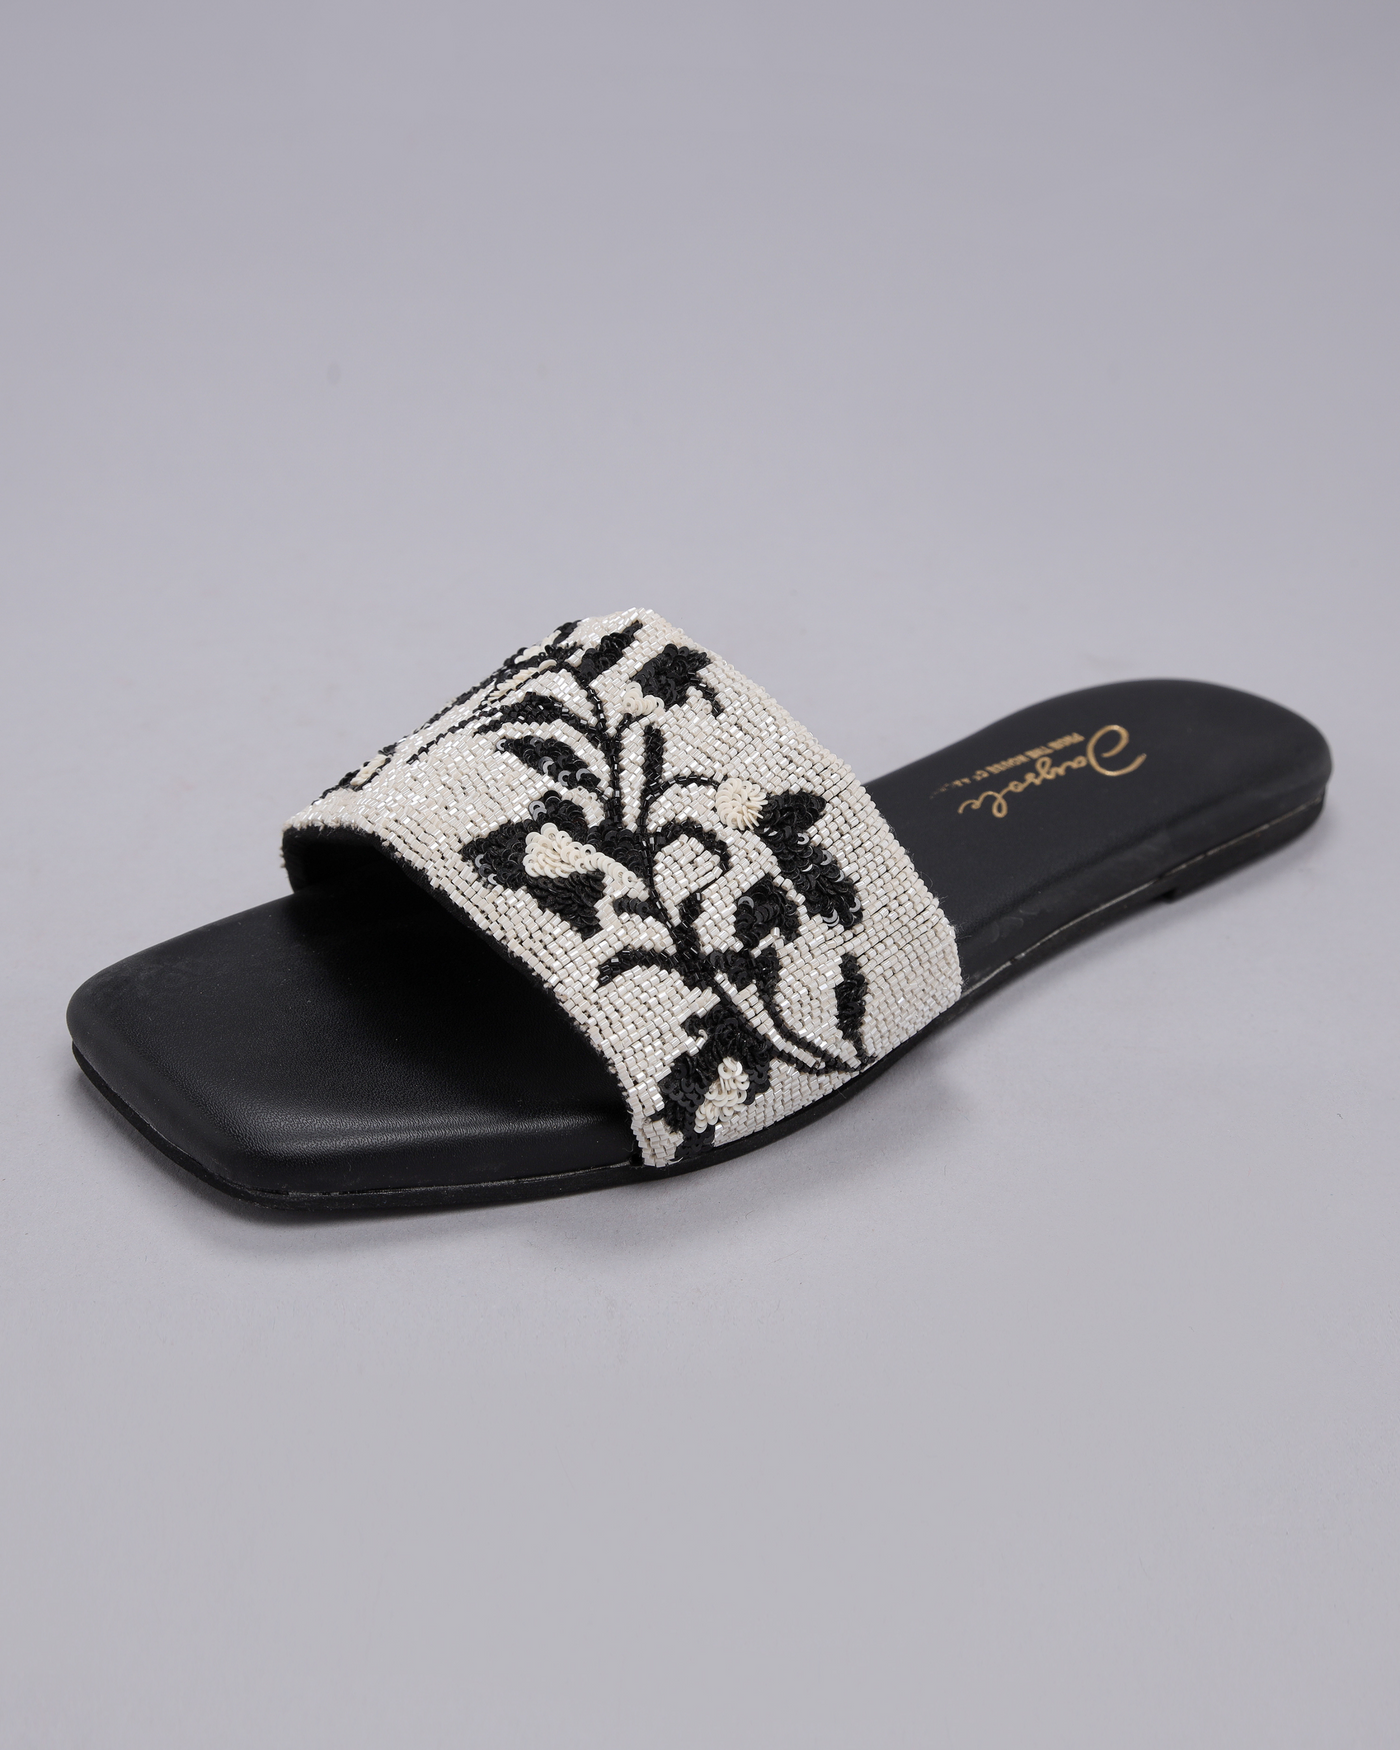 Gonzo Handcrafted Flats